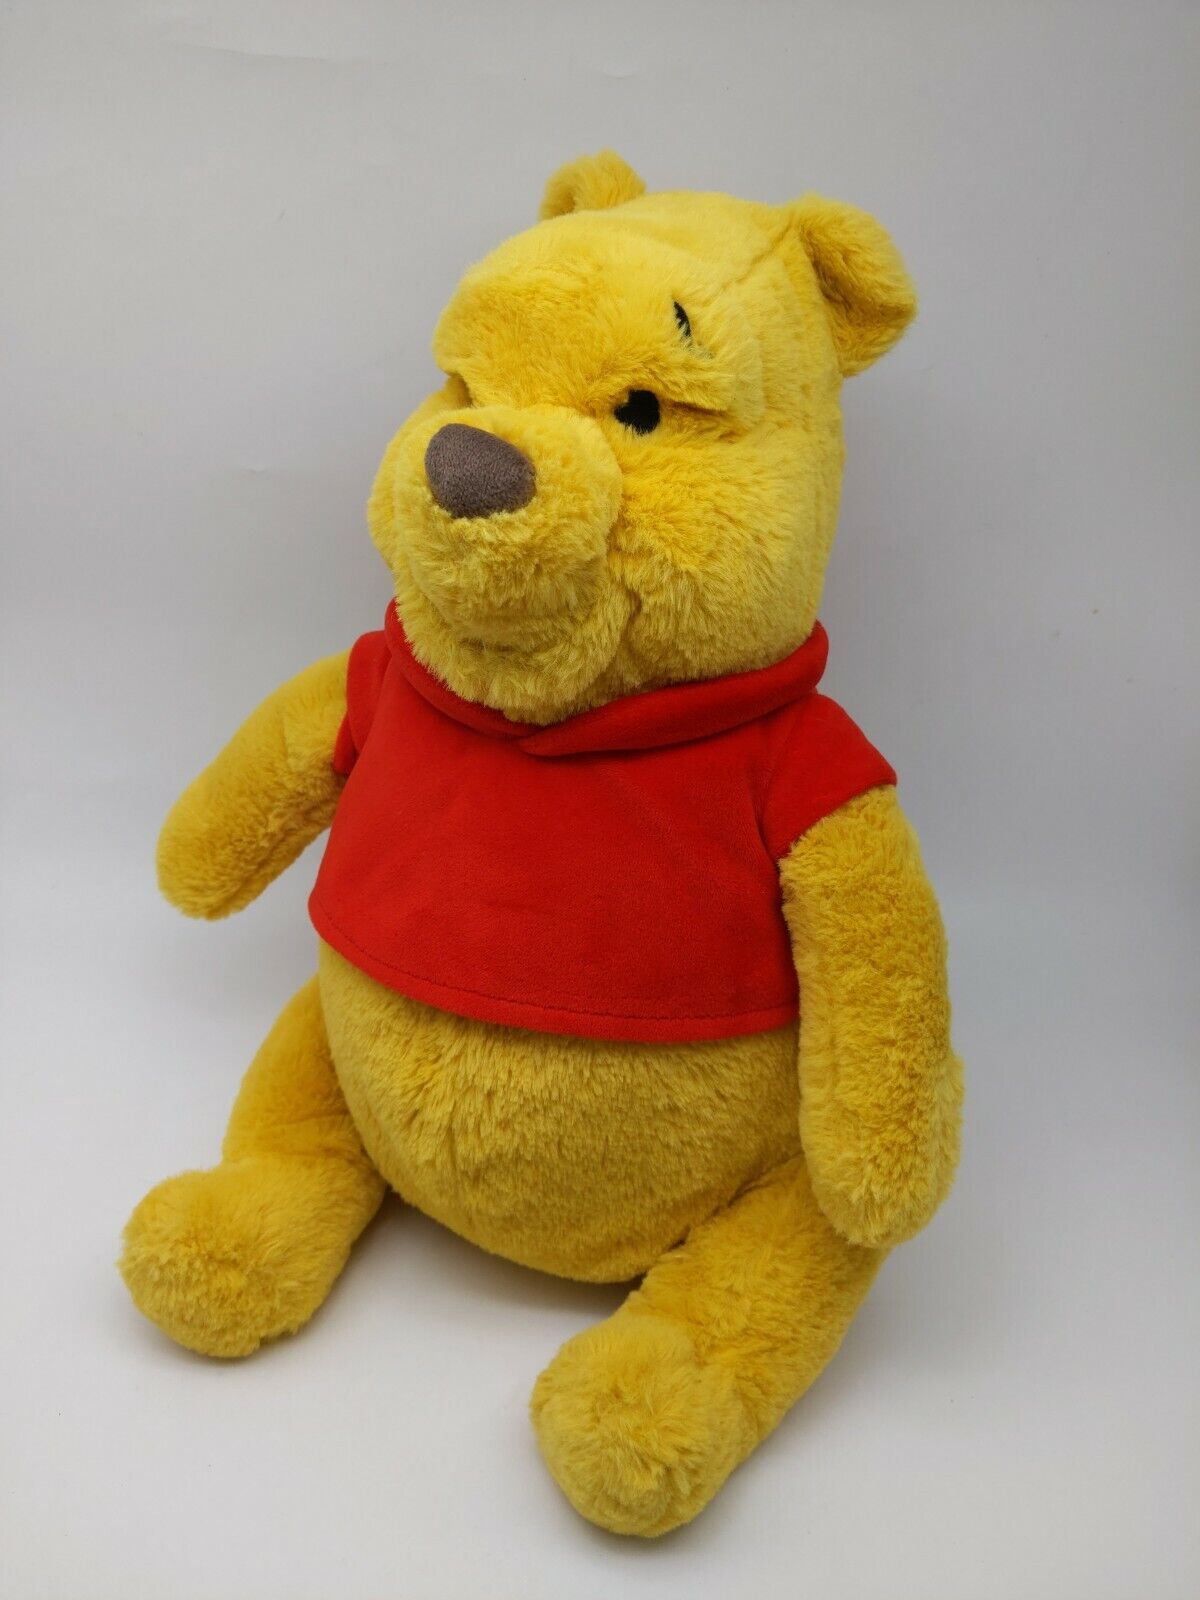 Winnie The Pooh Cuddly Toy: Where Imagination Meets Hugs